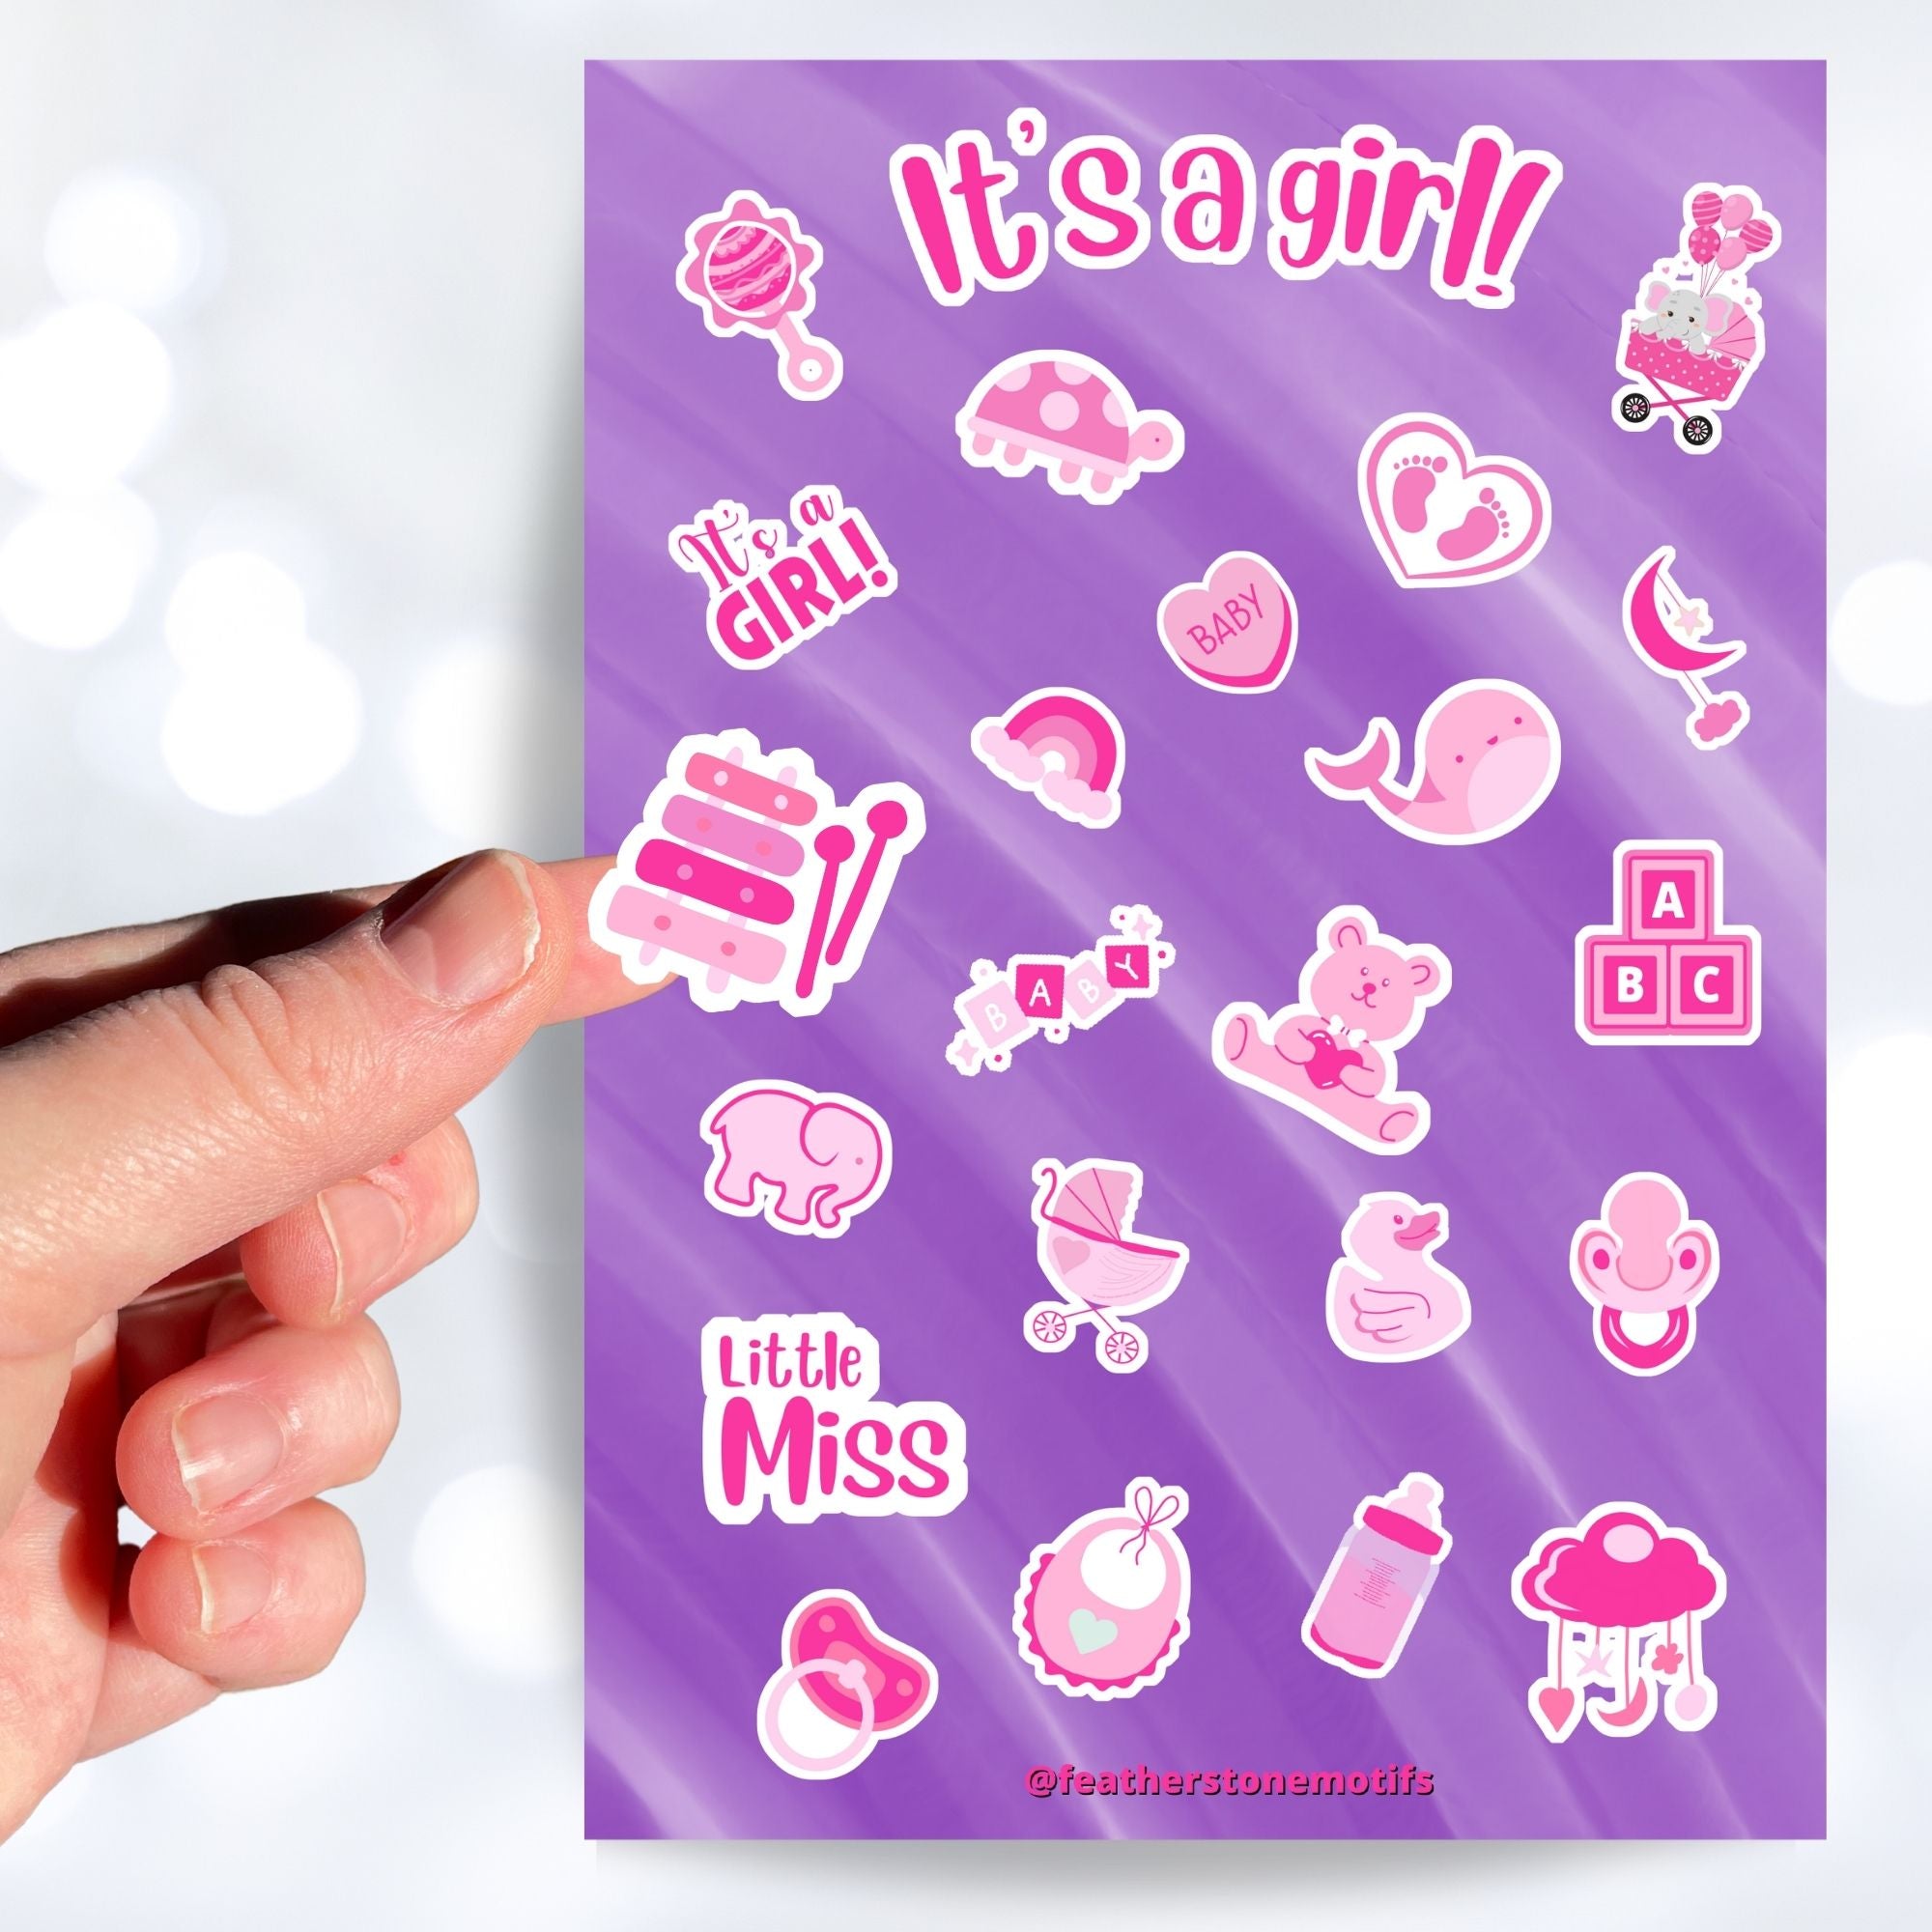 Congratulations, it's a girl! This sticker sheet is perfect for parents welcoming a baby girl into their family and it has lots of images of toys, a bottle, a stroller, and animals, all in pink on a purple background. This image shows a hand holding a xylophone sticker above the sticker sheet.